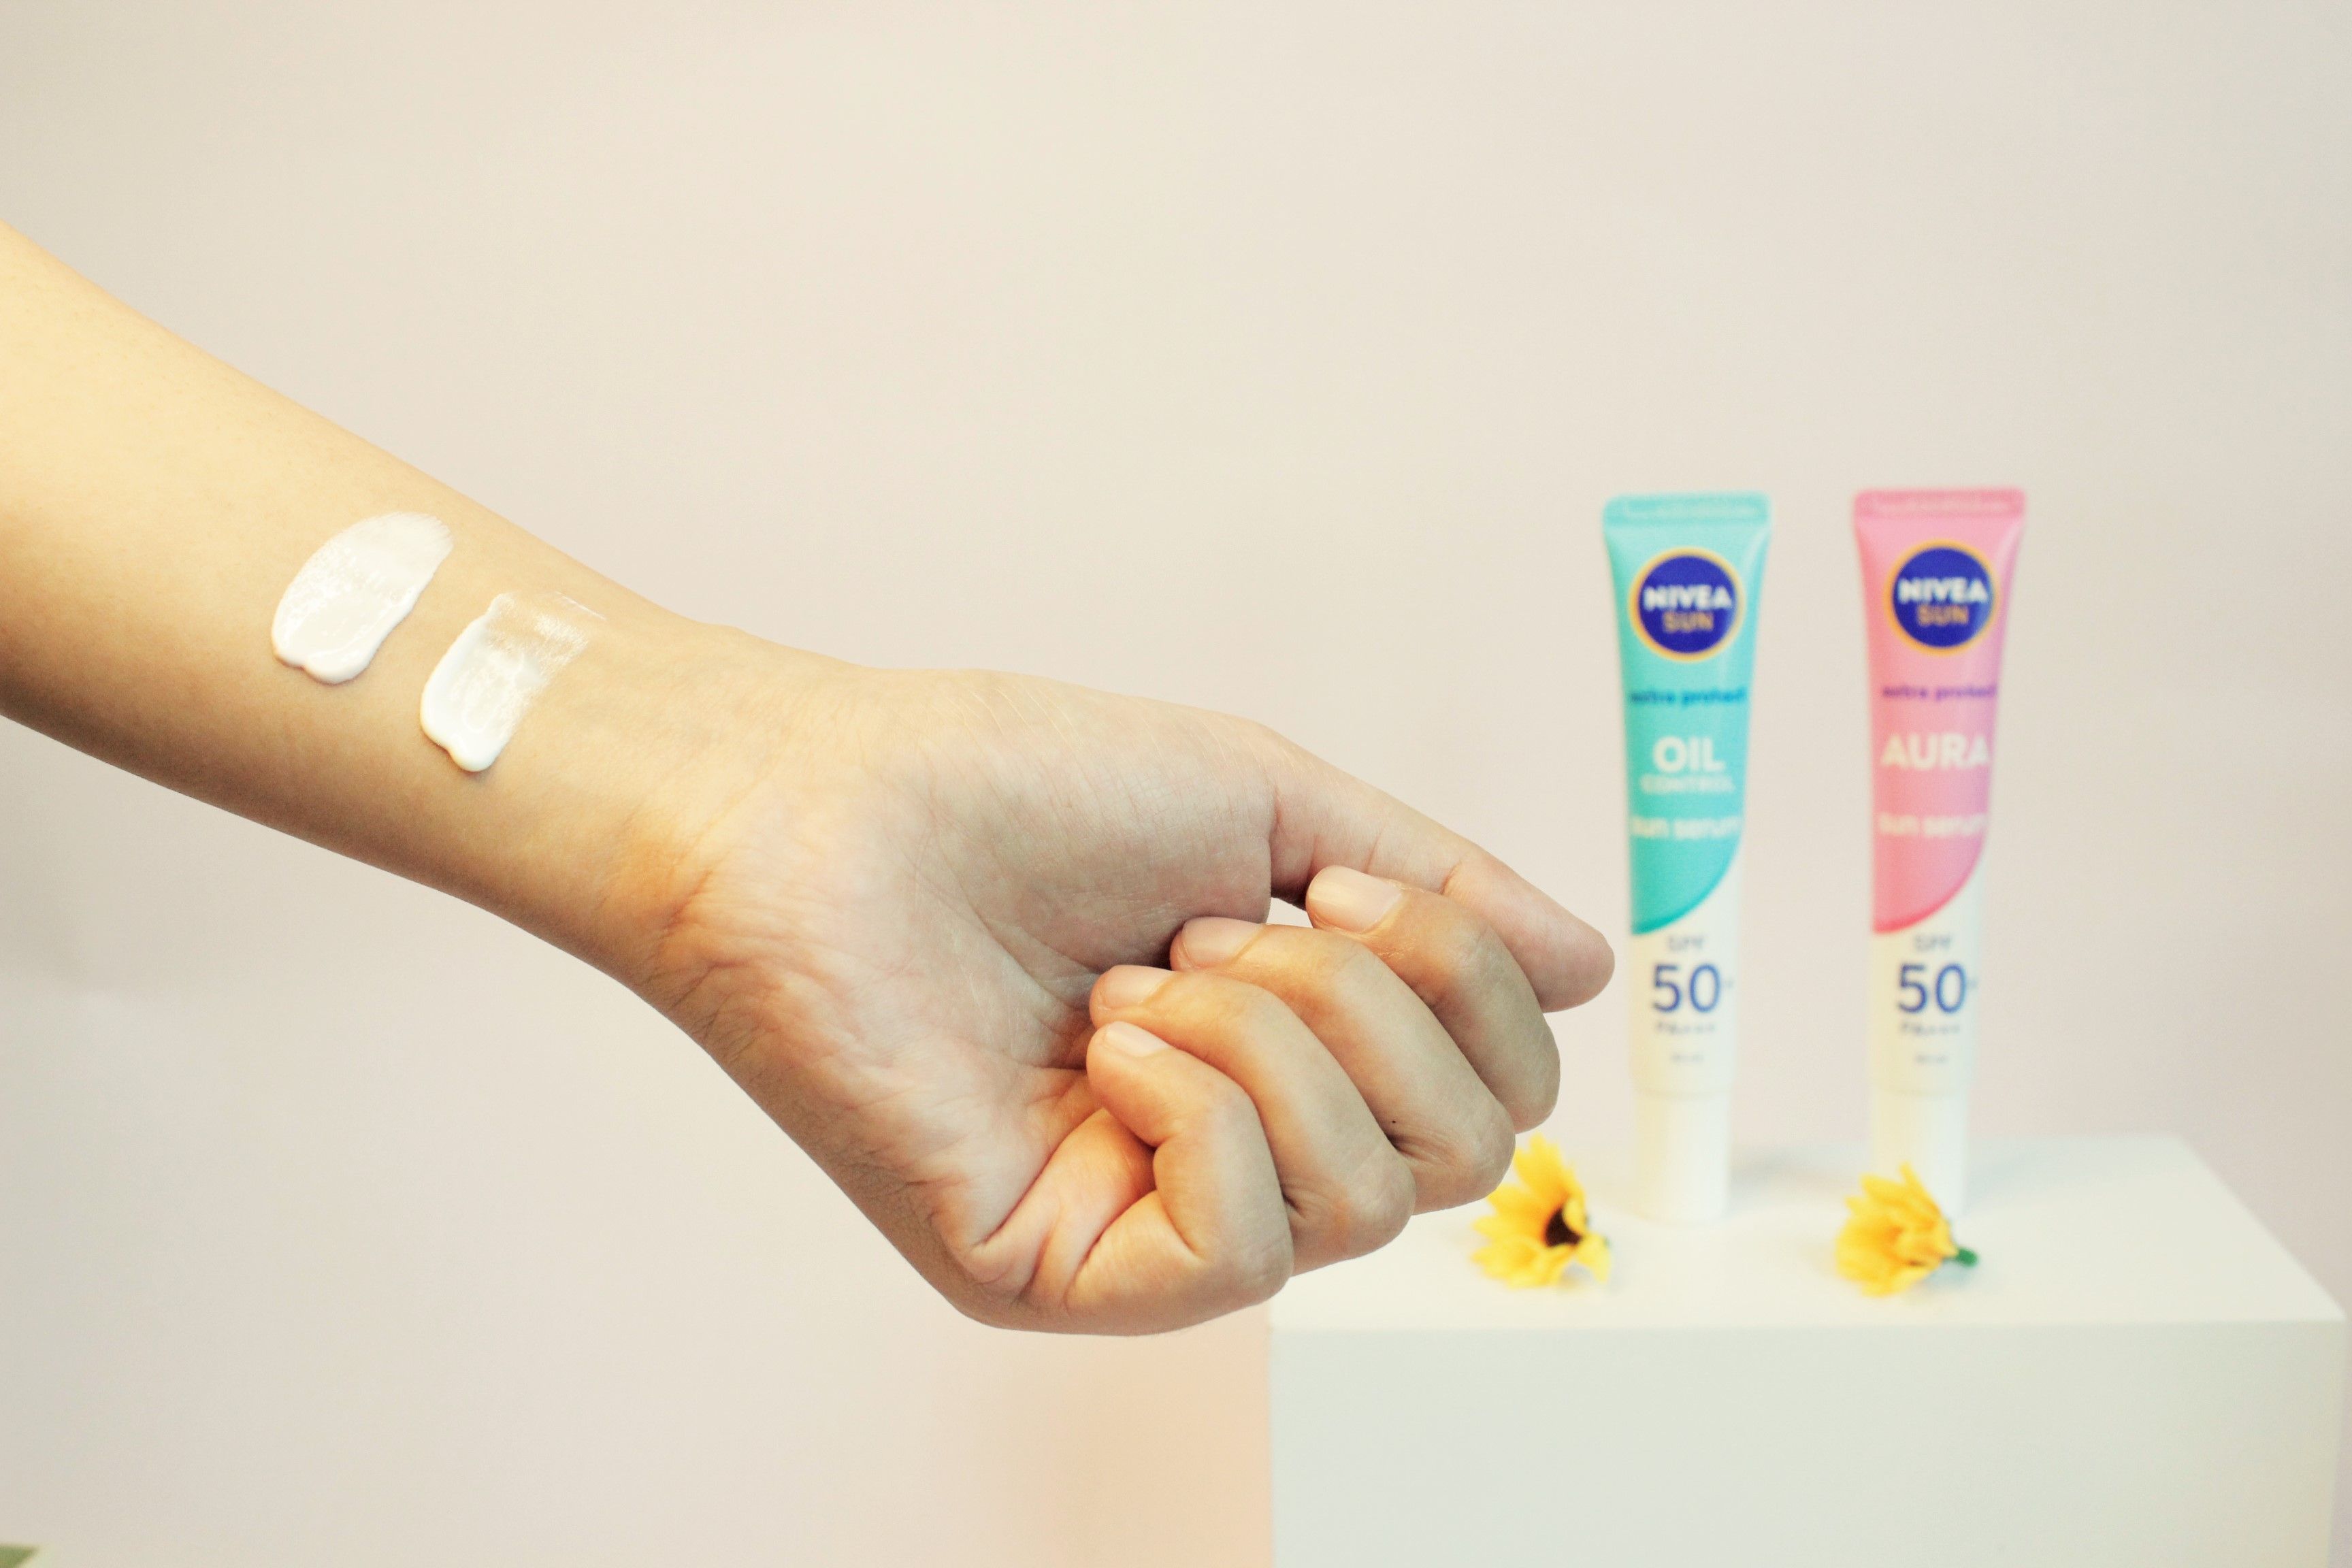 Bright Face & Protection, These are the 4 benefits of NiveA Sun Face Treatment